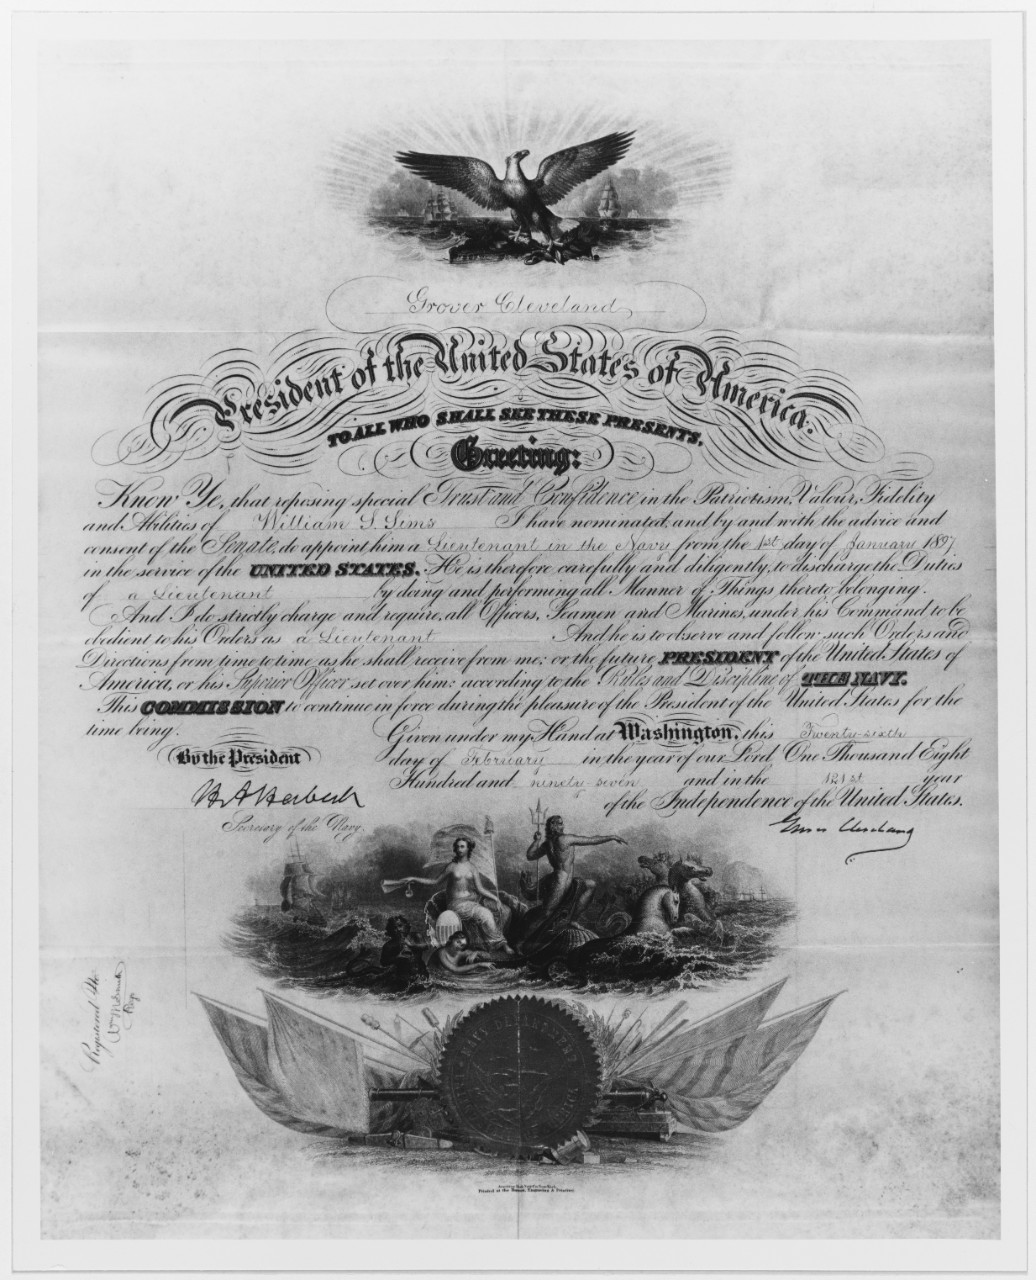 Commissioning certificate for William S. Sims, as Lieutenant in the Navy, dated 1 January 1897.